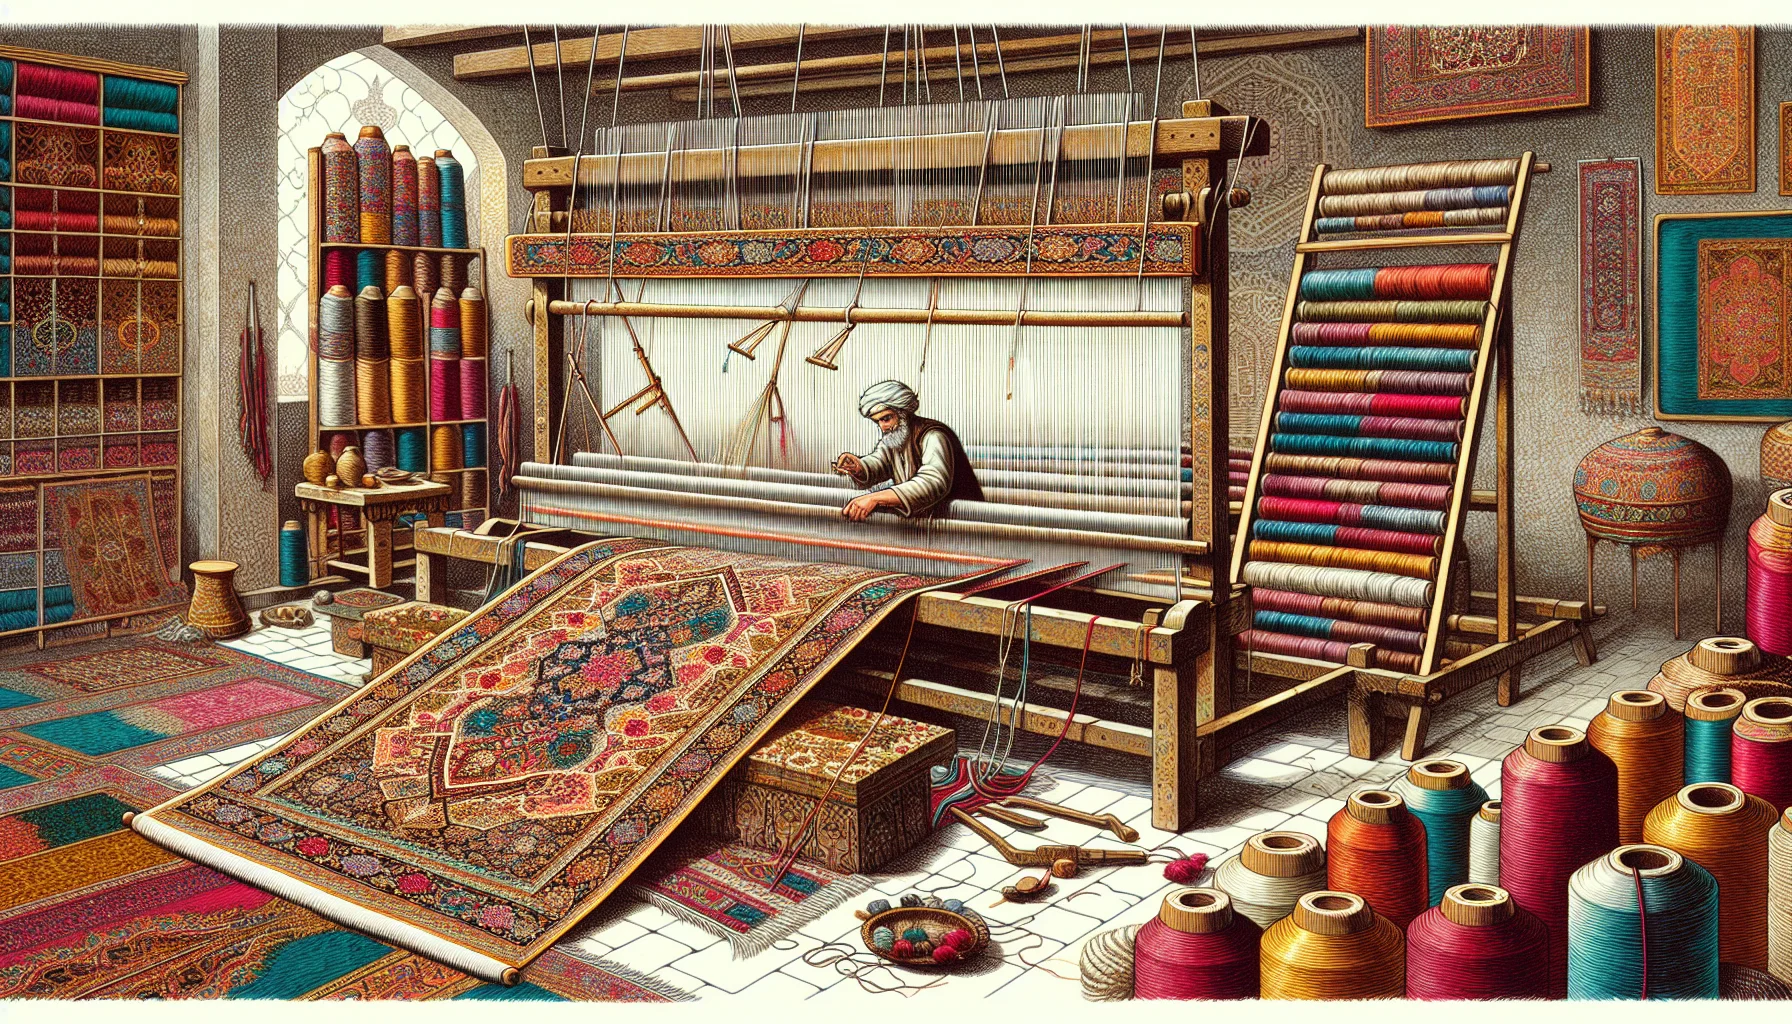 Illustration of traditional weaving techniques for Persian rugs